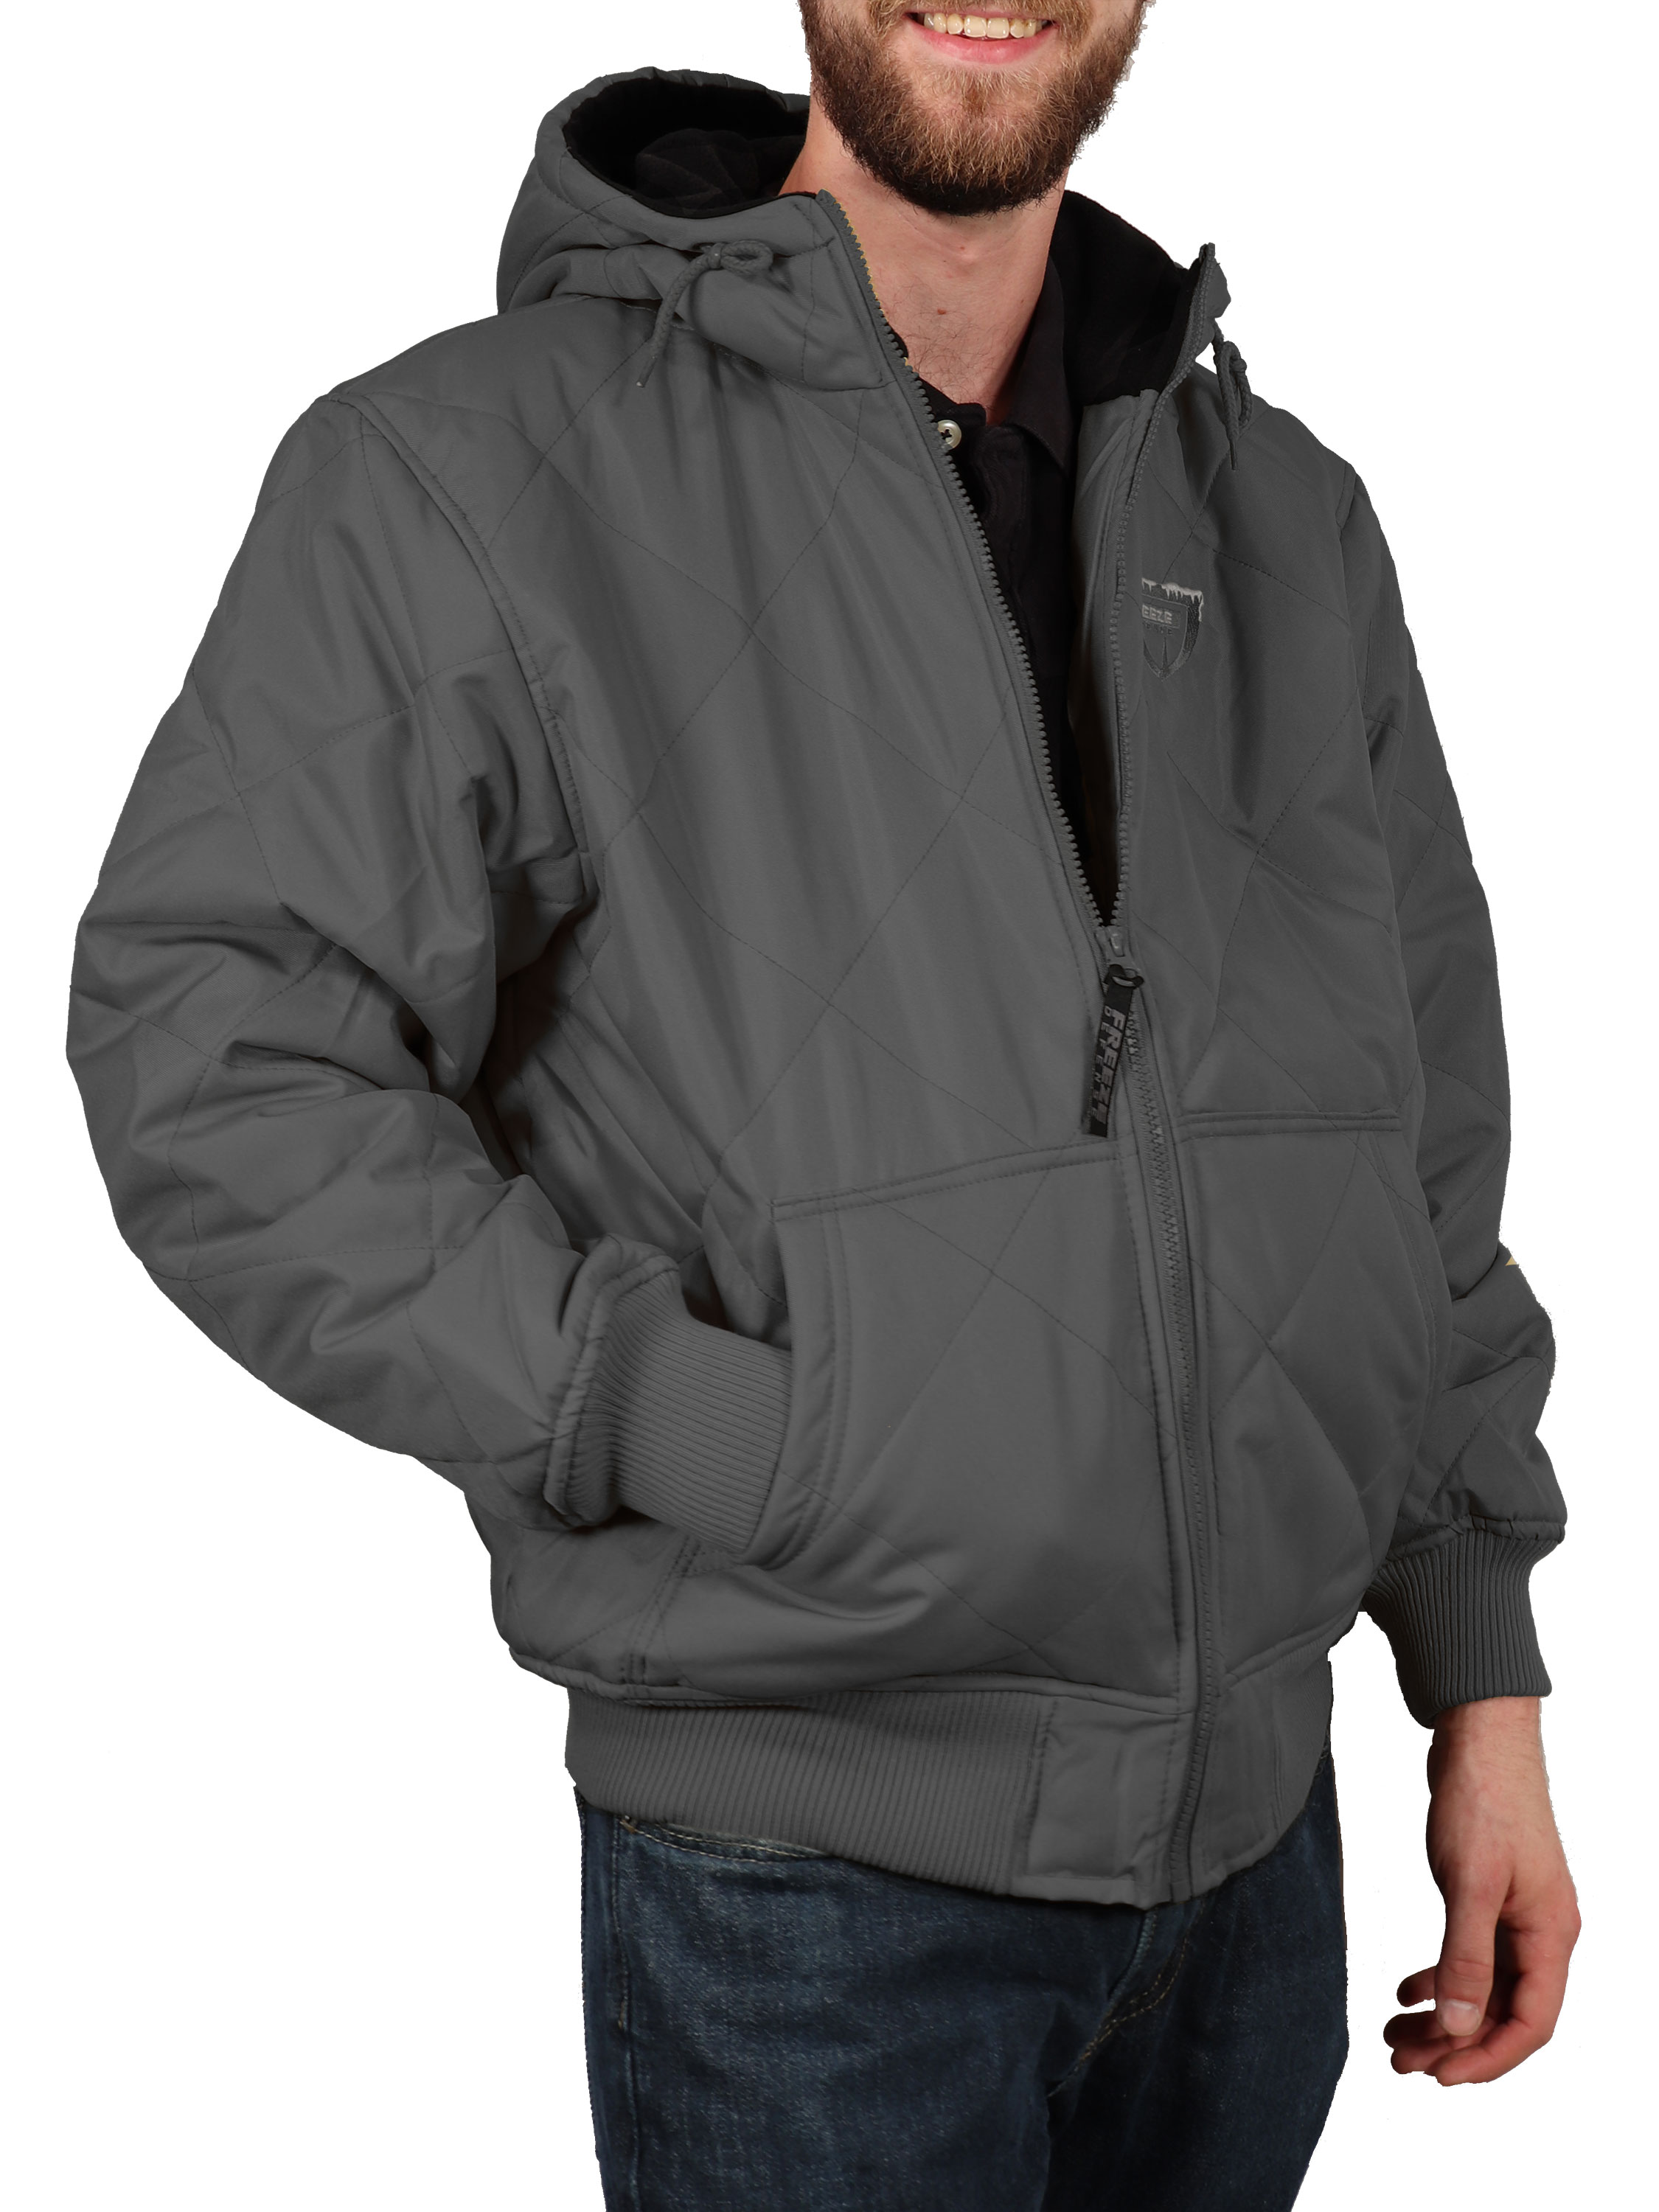 New Men/'s Oversized Heavy Padded Winter Jacket With Hoodie for Big and Tall